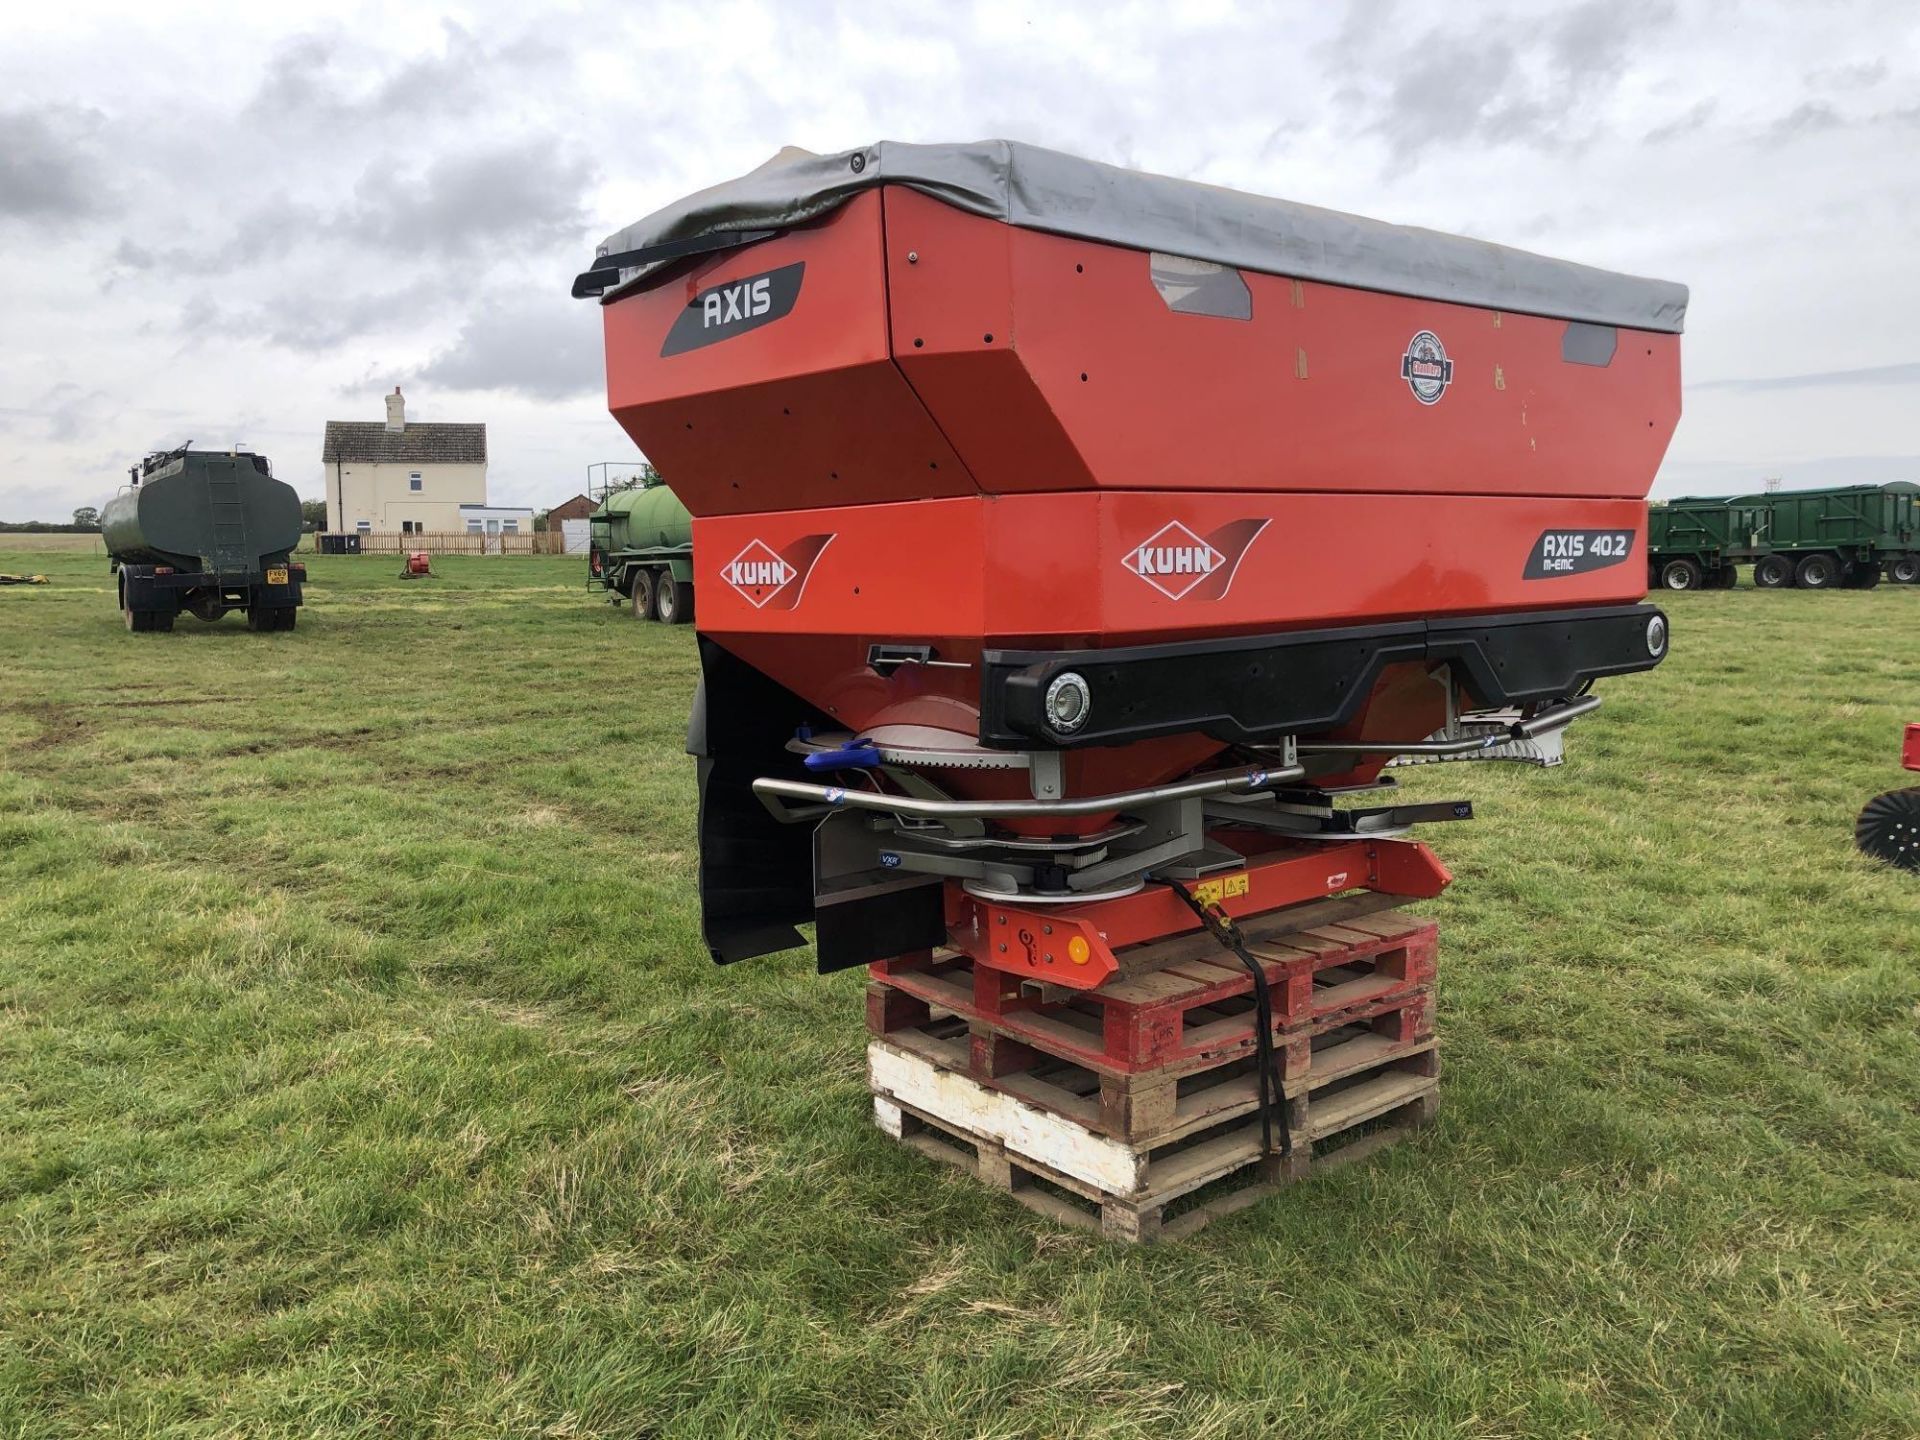 2016 Kuhn Axis-M 40.2 EMC 36m twin disc fertiliser spreader with border control. Serial No: 09-04626 - Image 10 of 13